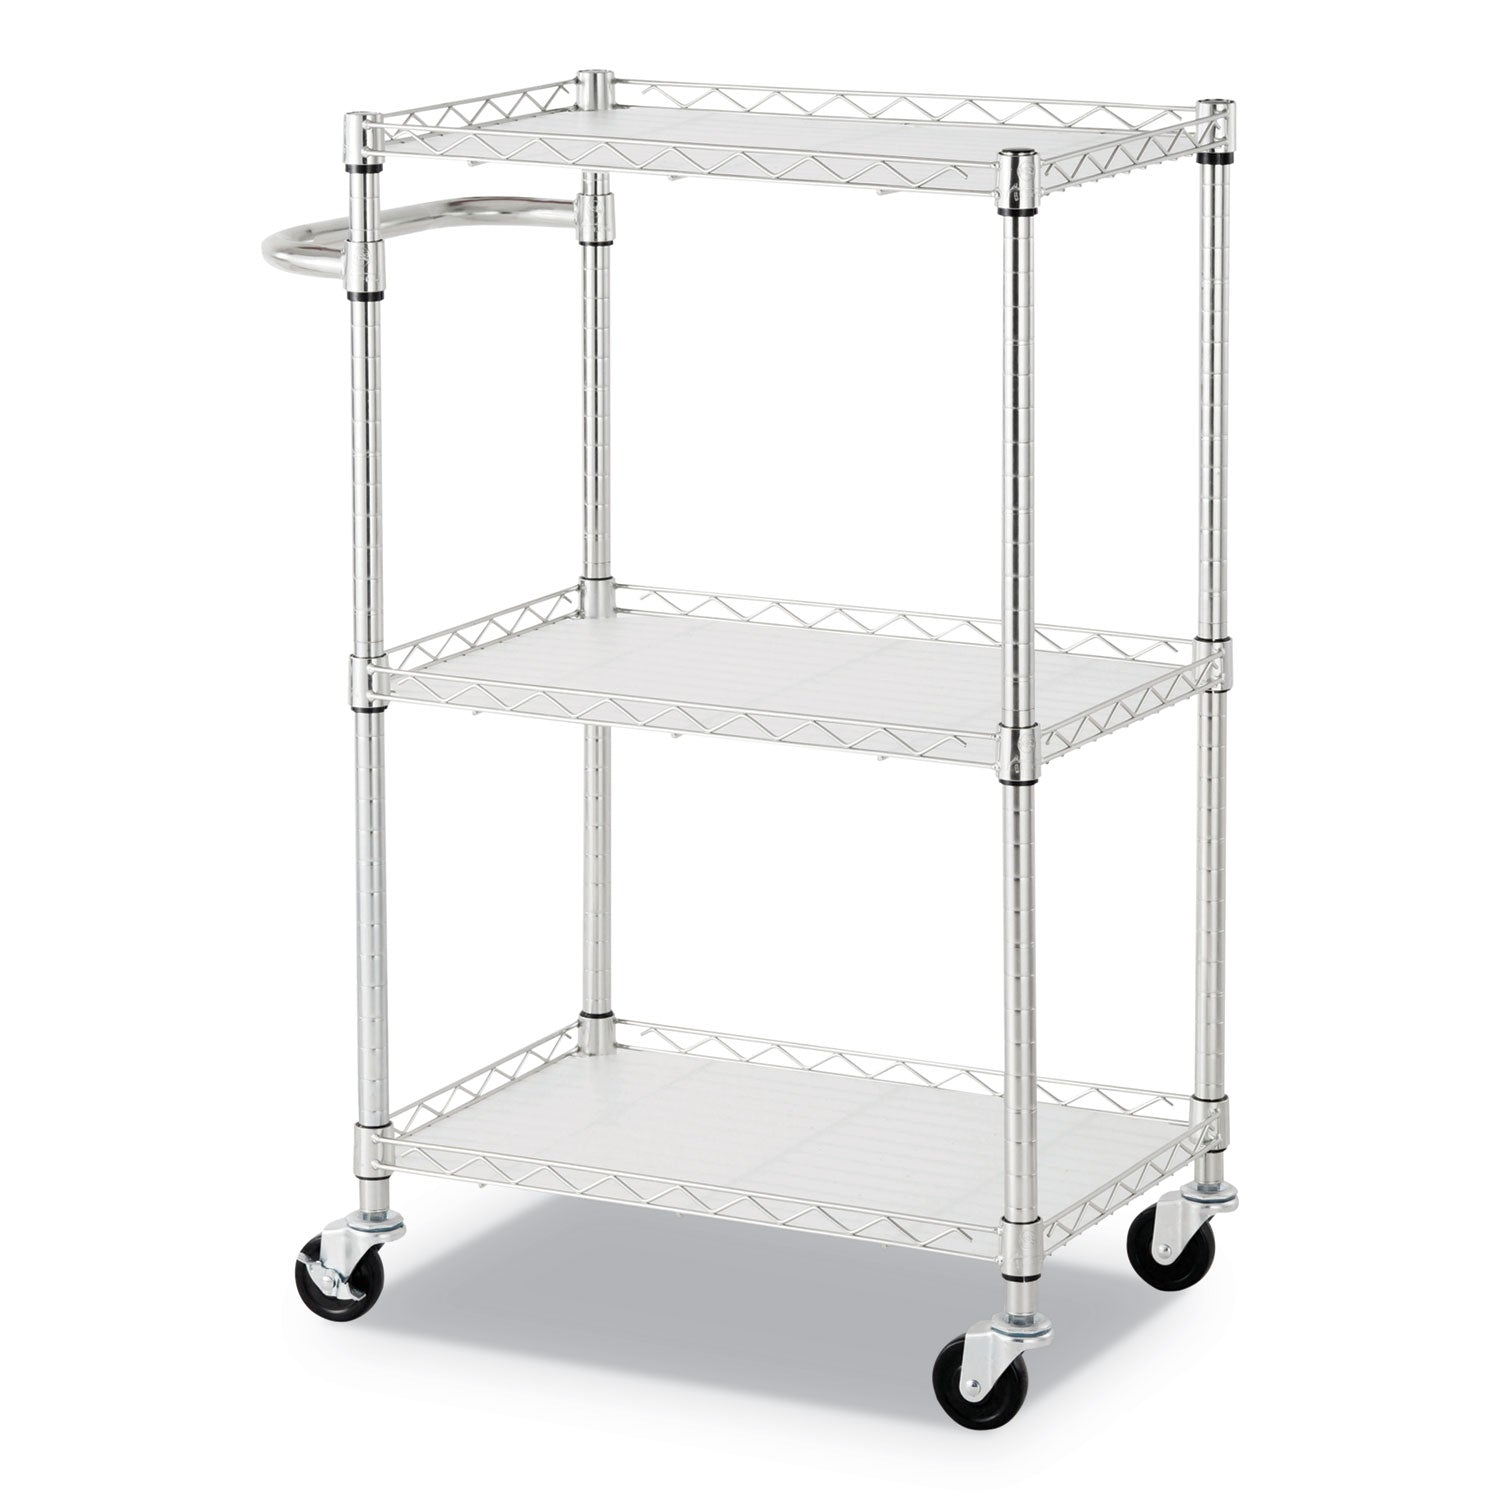 three-shelf-wire-cart-with-liners-metal-3-shelves-450-lb-capacity-24-x-16-x-39-silver_alesw322416sr - 3